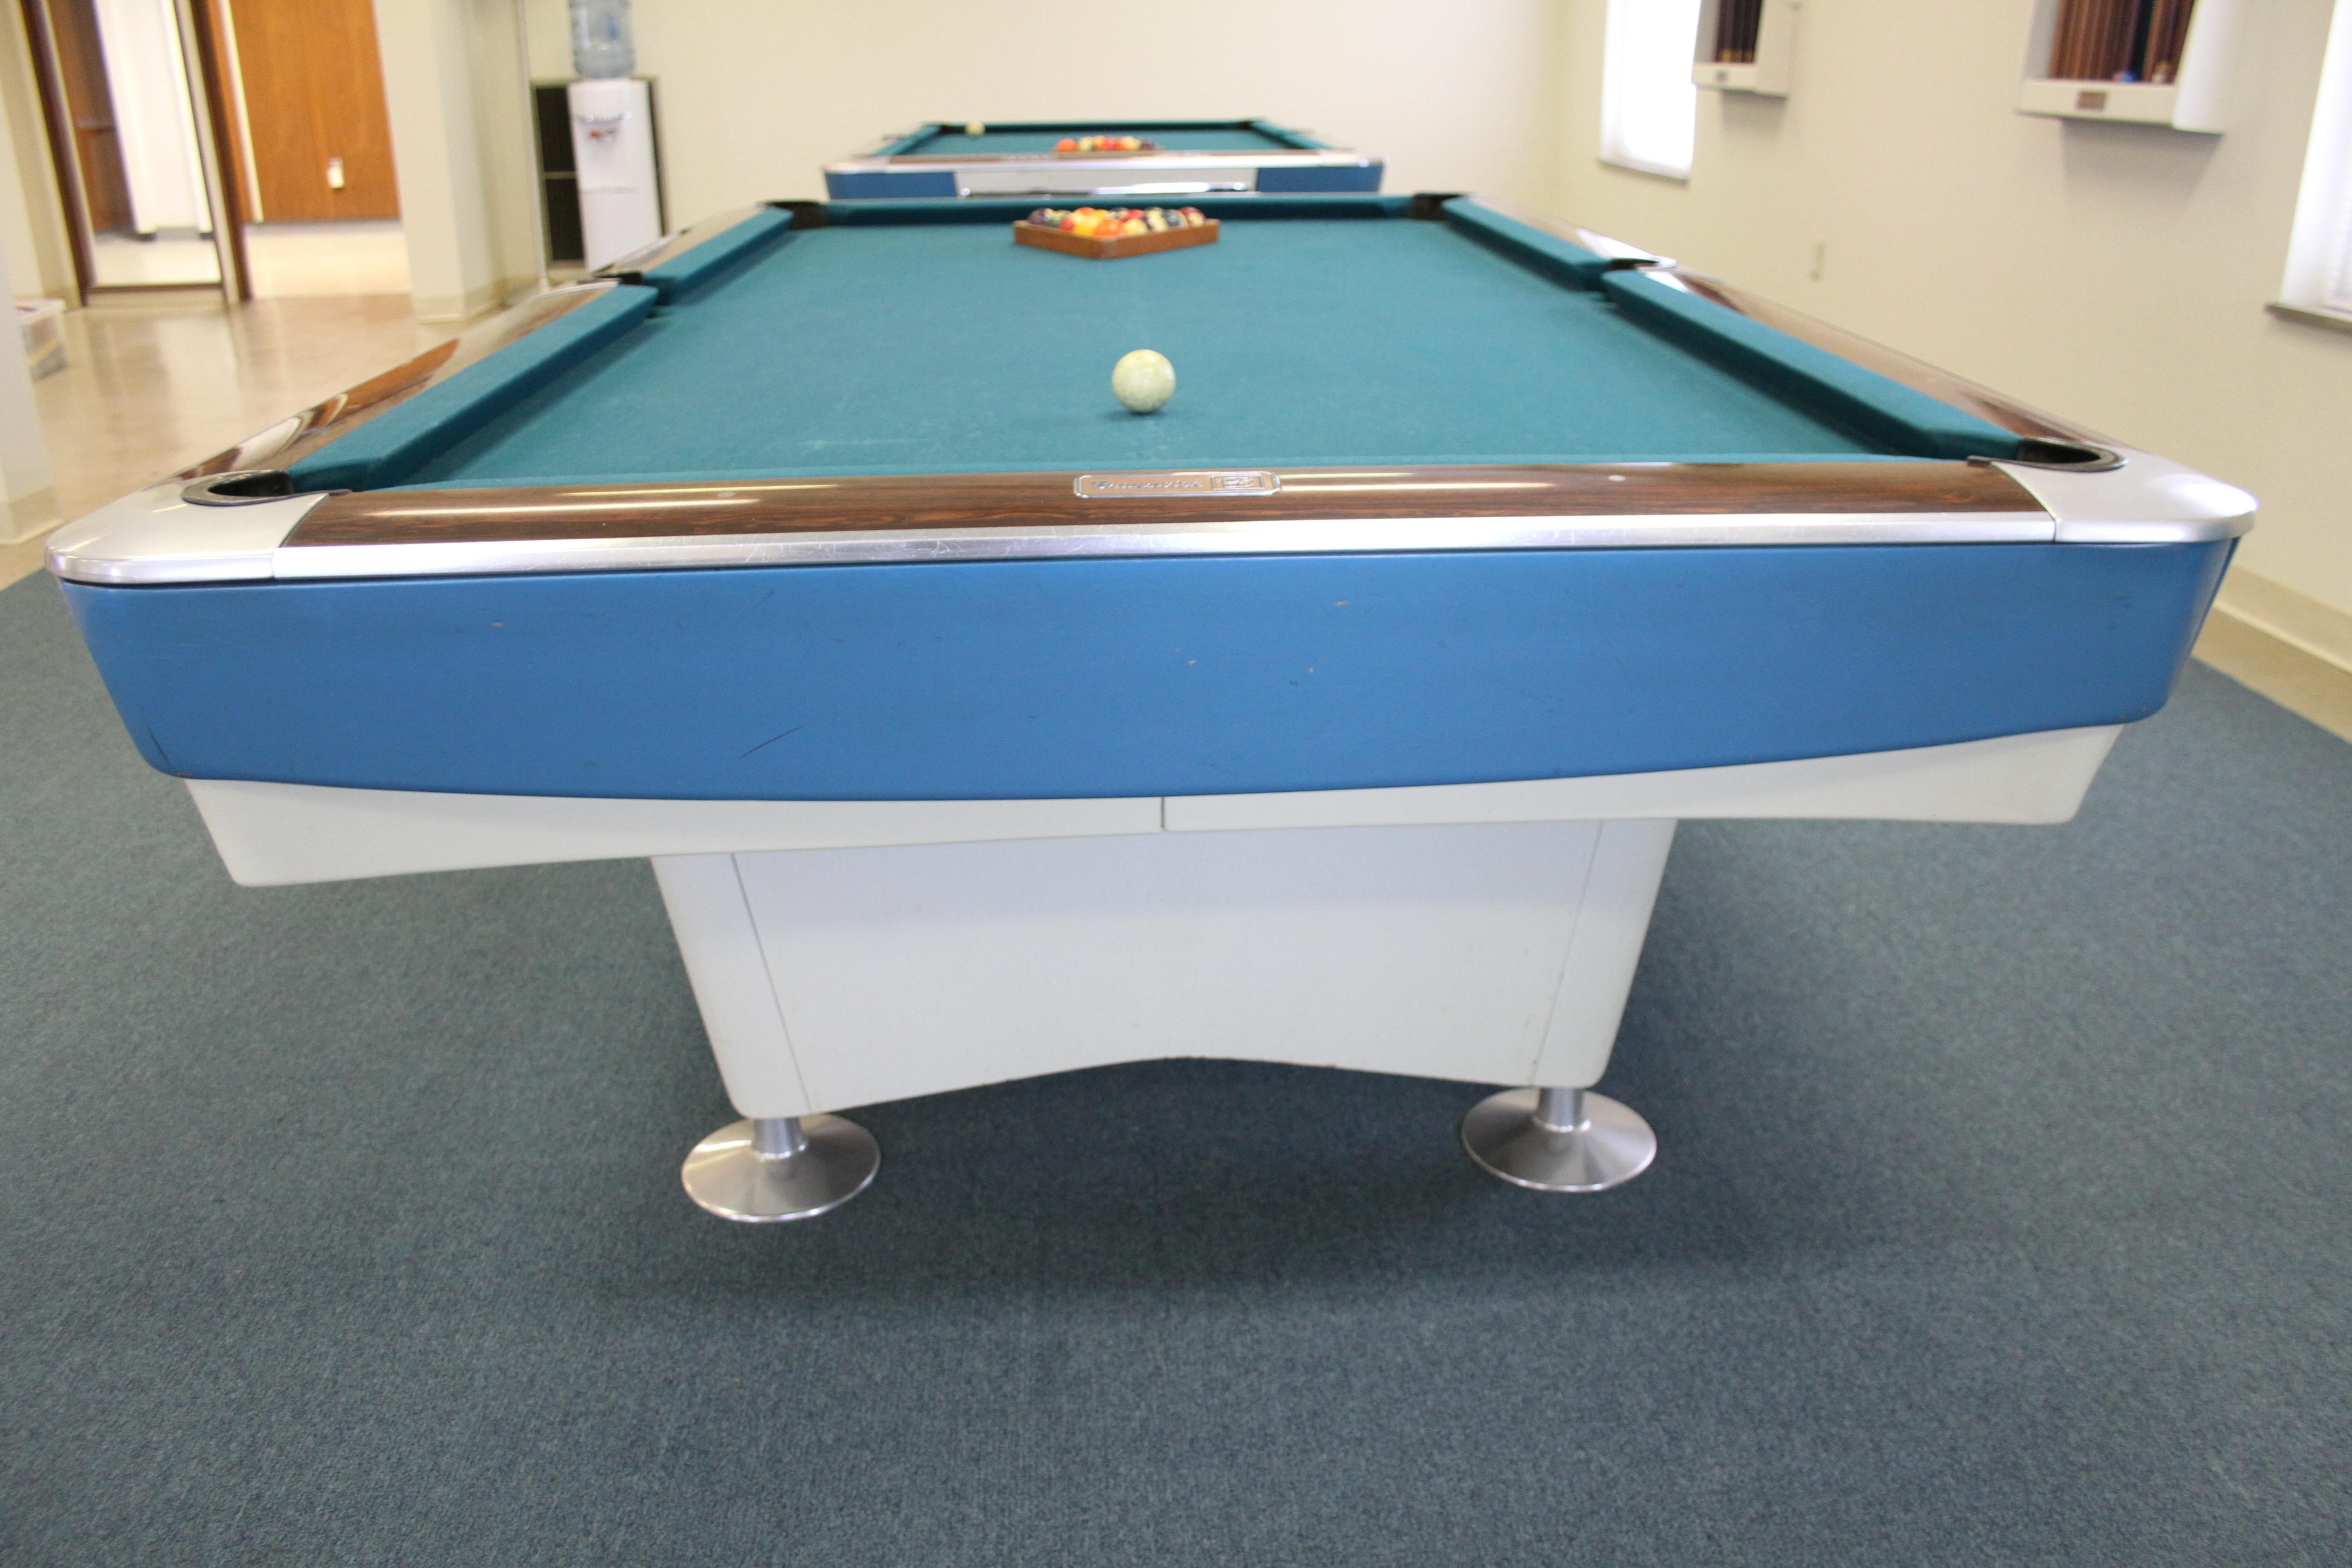 Mid-20th Century Mid-Century Modern Brunswick Gold Crown I Billiards Pool Table with Blue Aprons